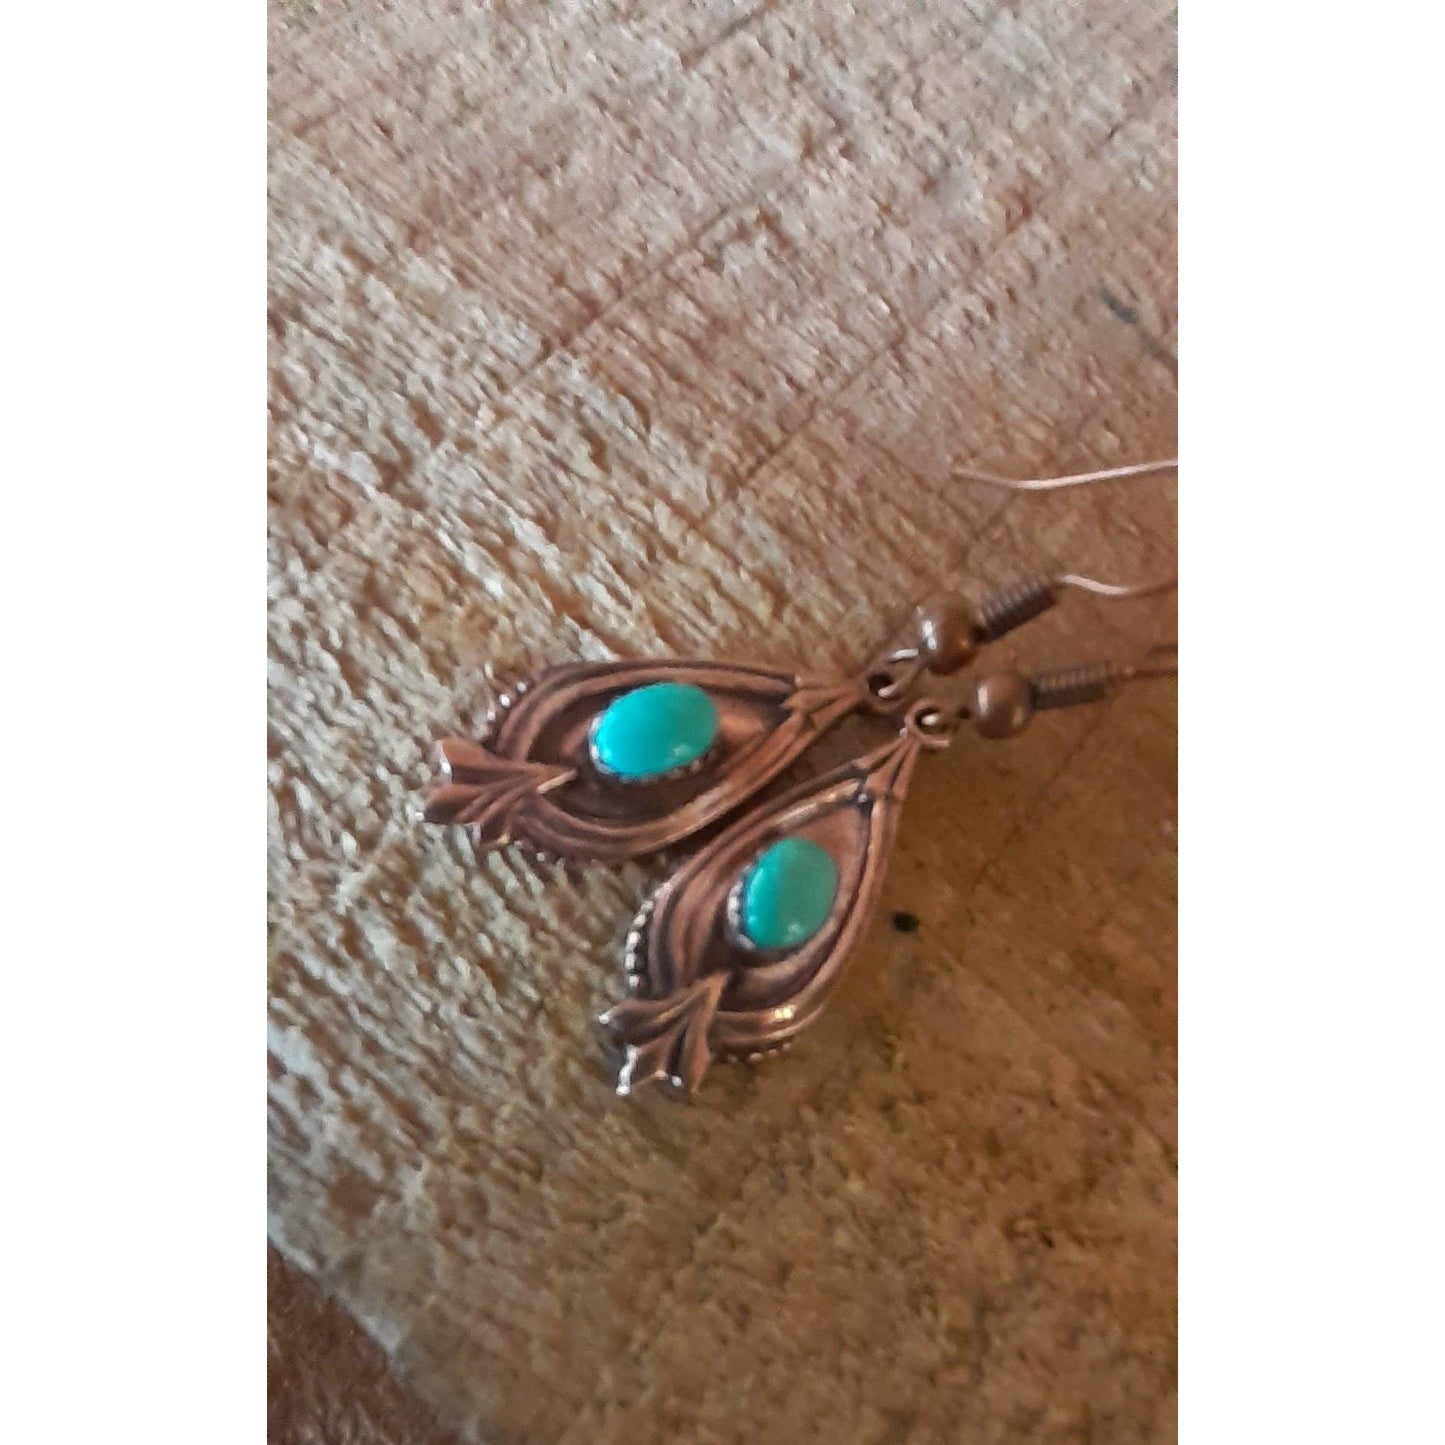 Copper and Turquoise Dangling Earrings - WarmRainyDay